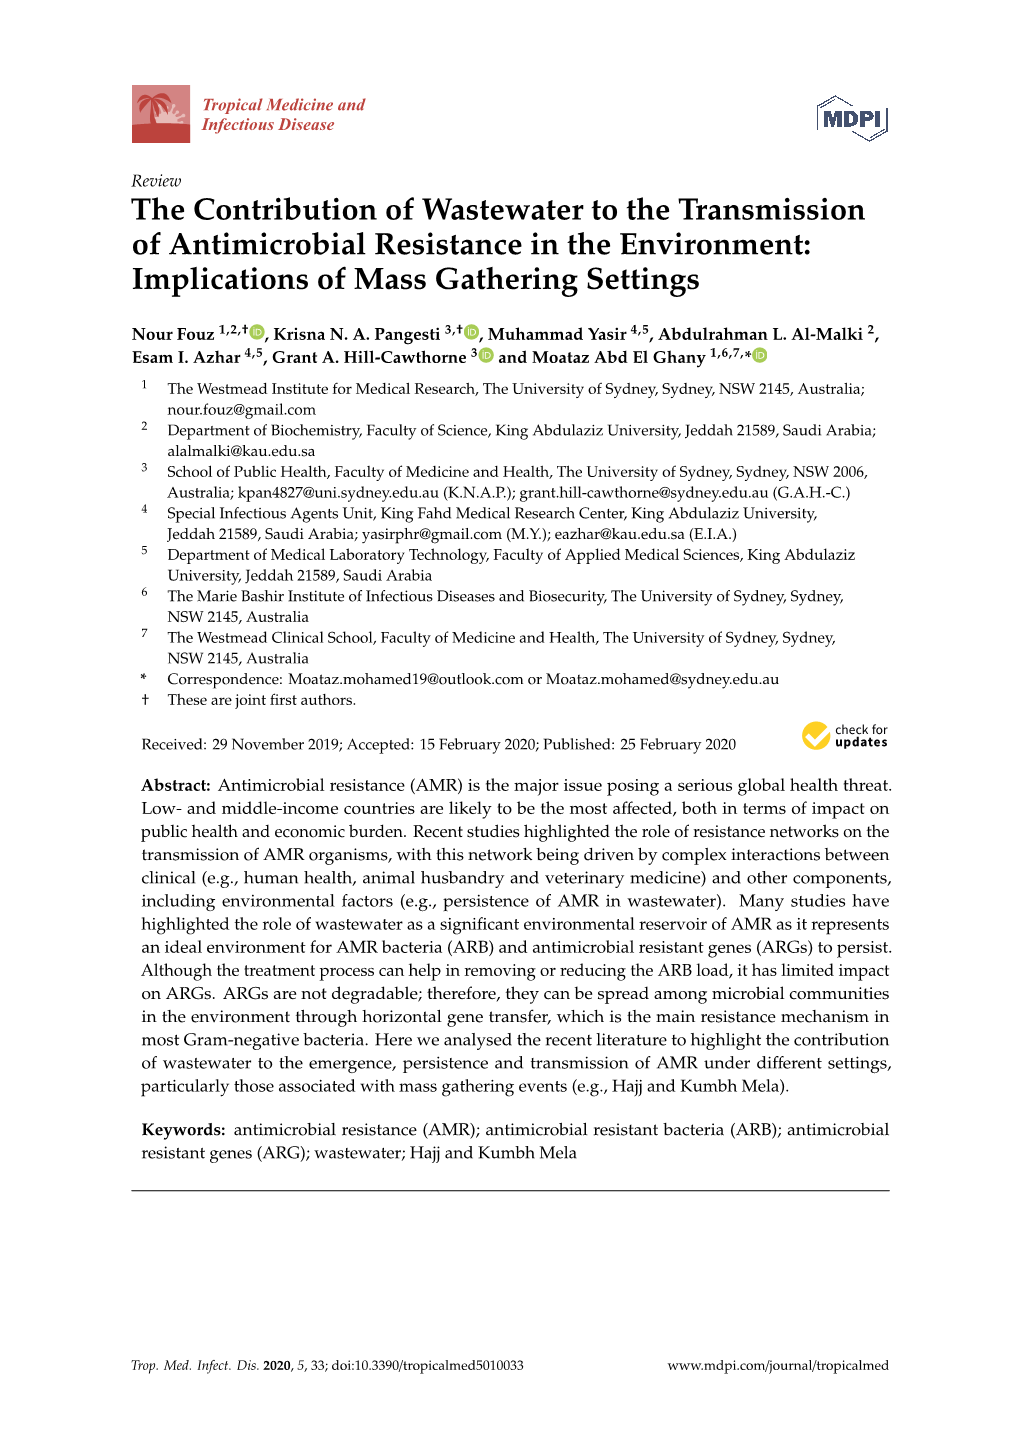 The Contribution of Wastewater to the Transmission of Antimicrobial Resistance in the Environment: Implications of Mass Gathering Settings